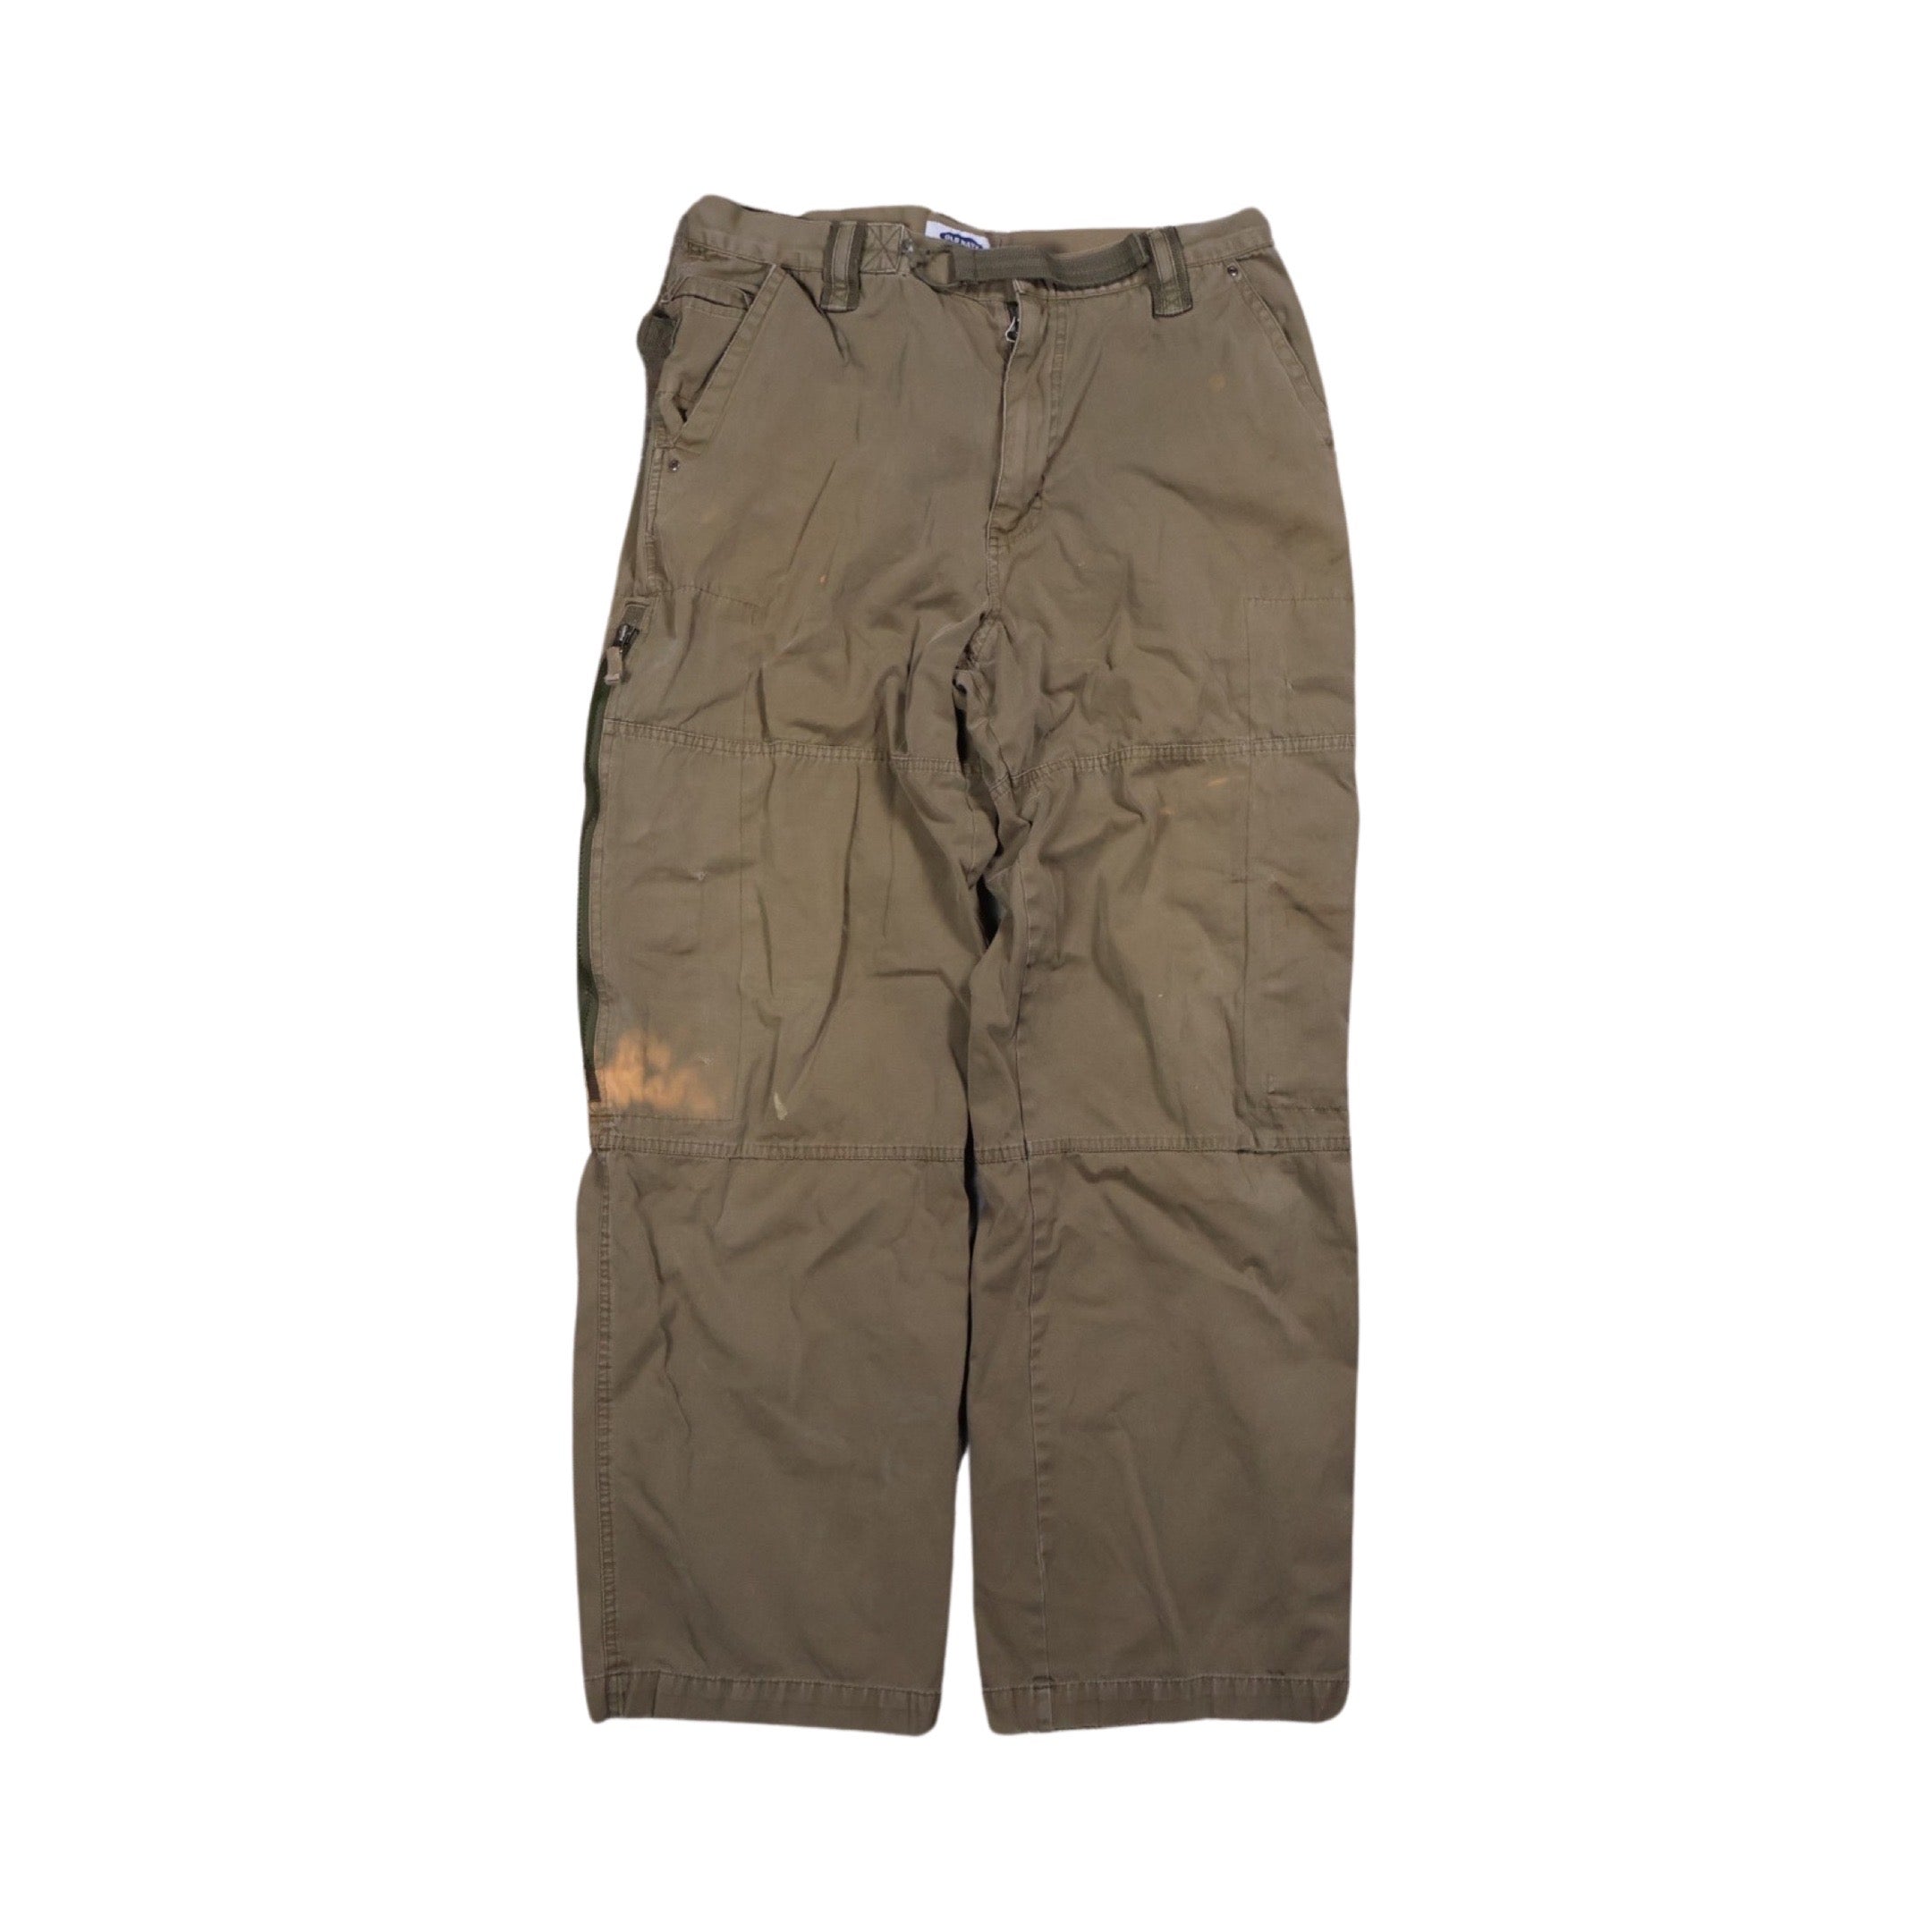 Green Old Navy Cargo Pants (32”)